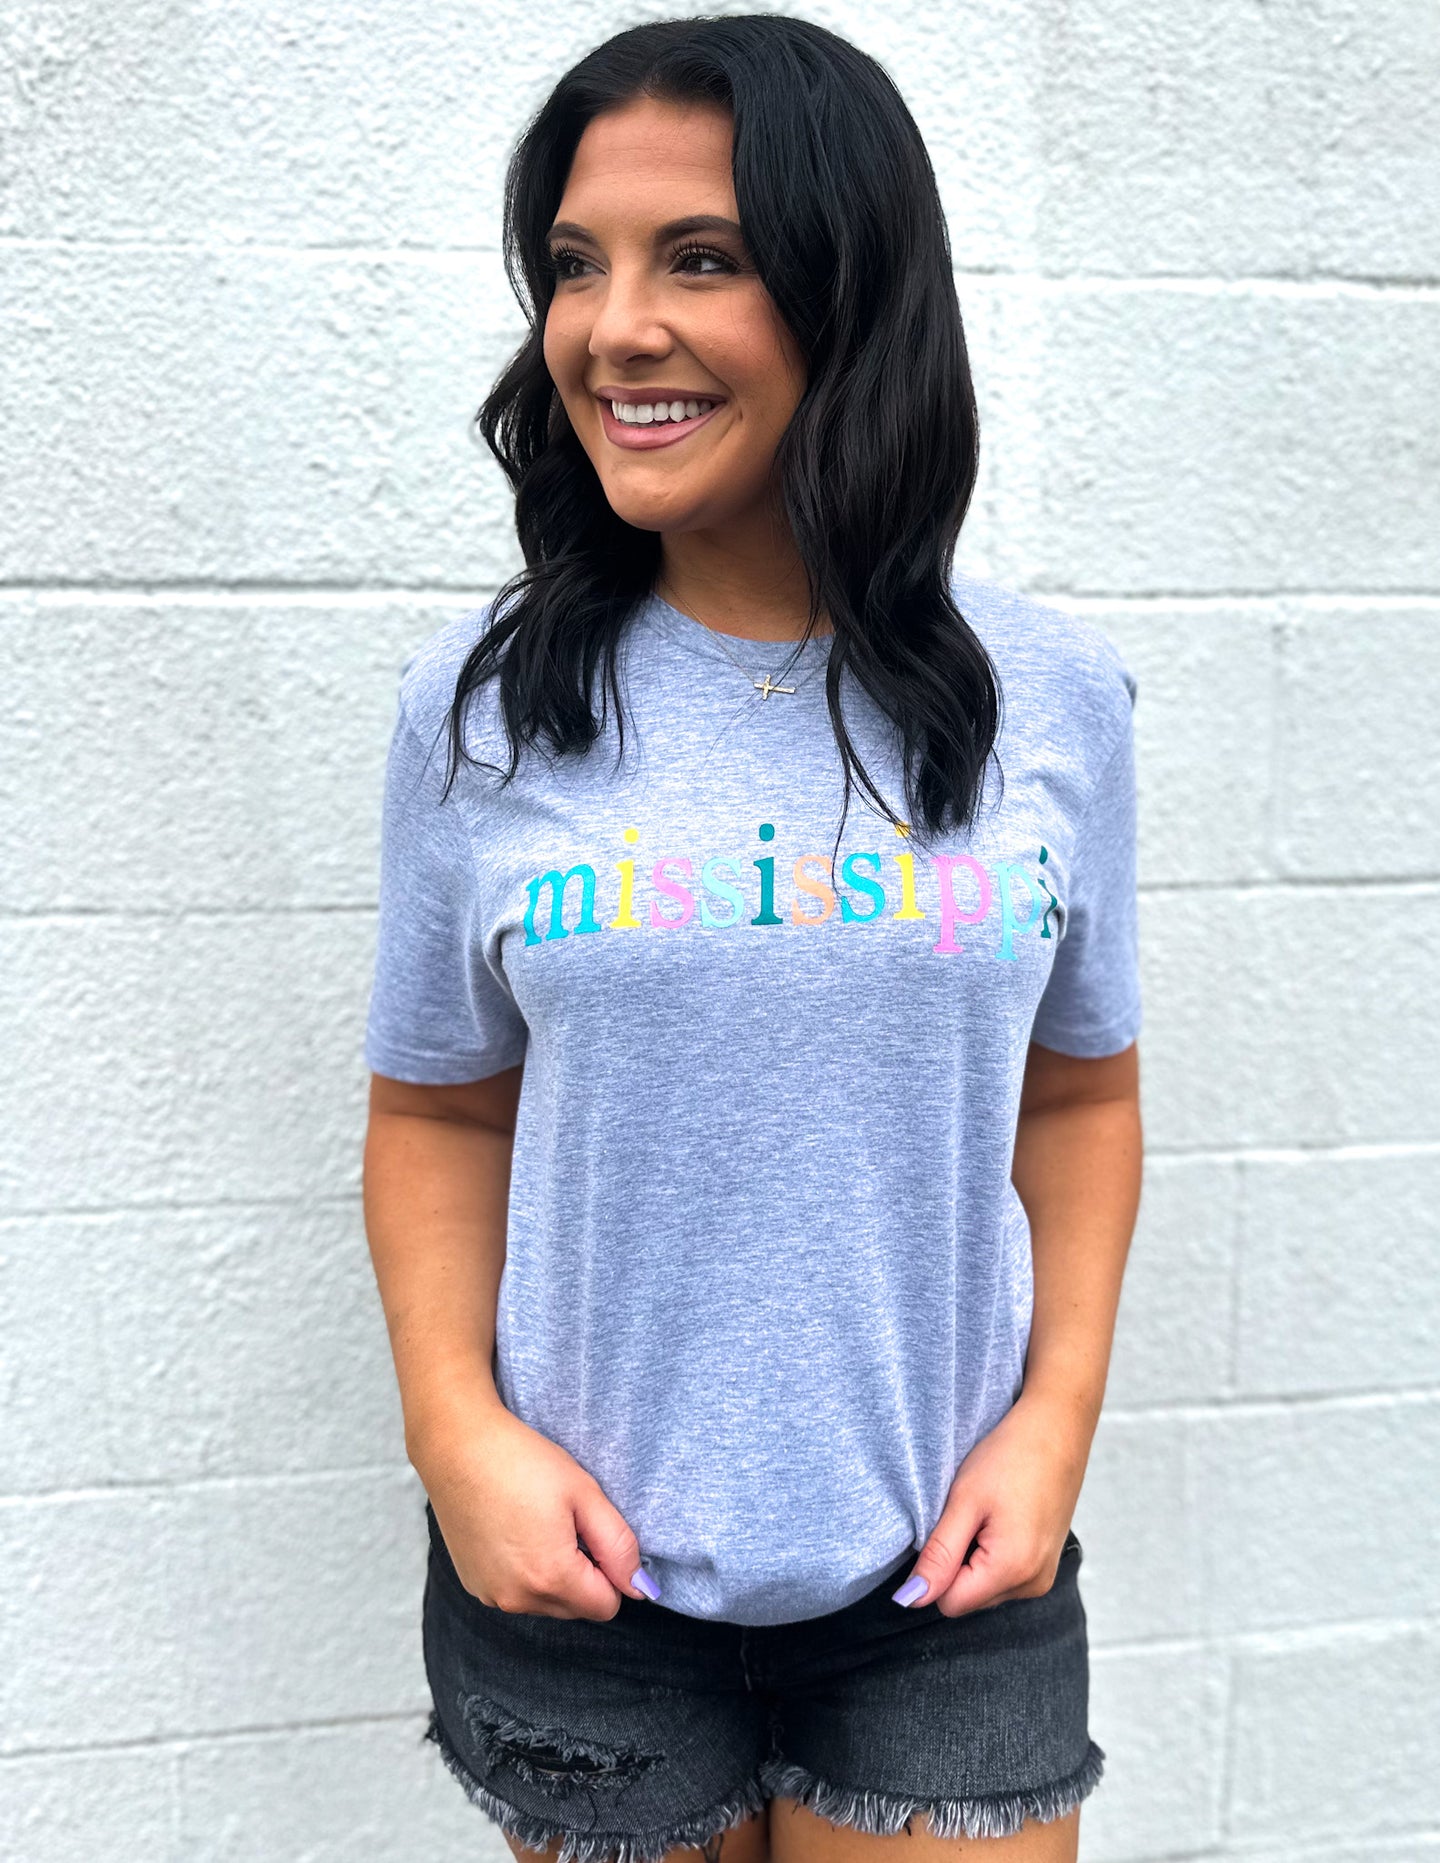 The Addyson Nicole Company Mississippi SS Tee